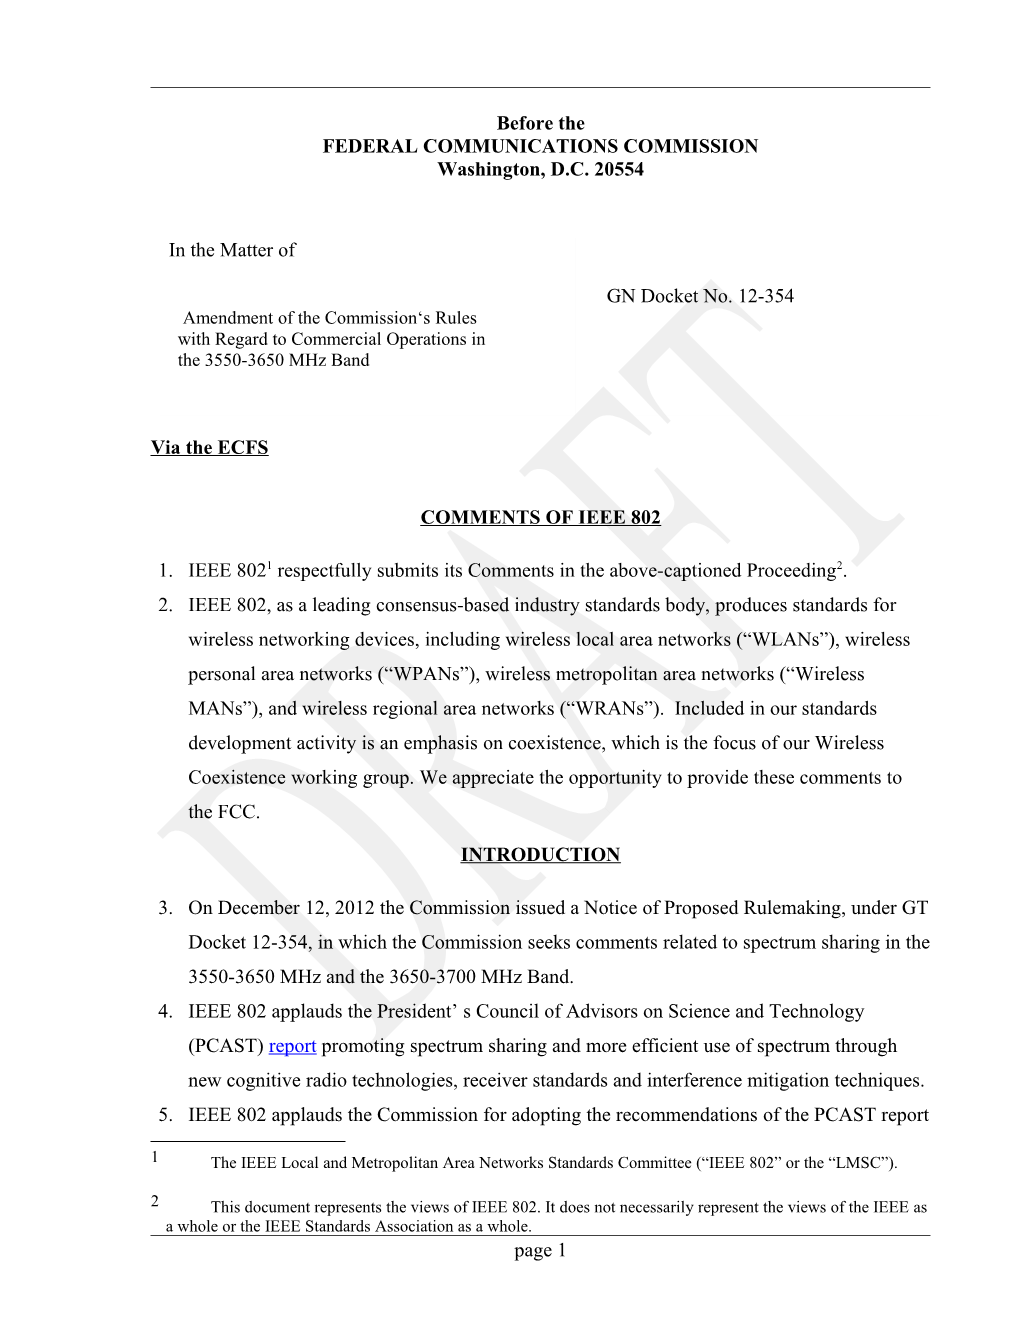 IEEE 801.18 Comments on Progeny Request for Waiver of M-LMS Construction Rule s1